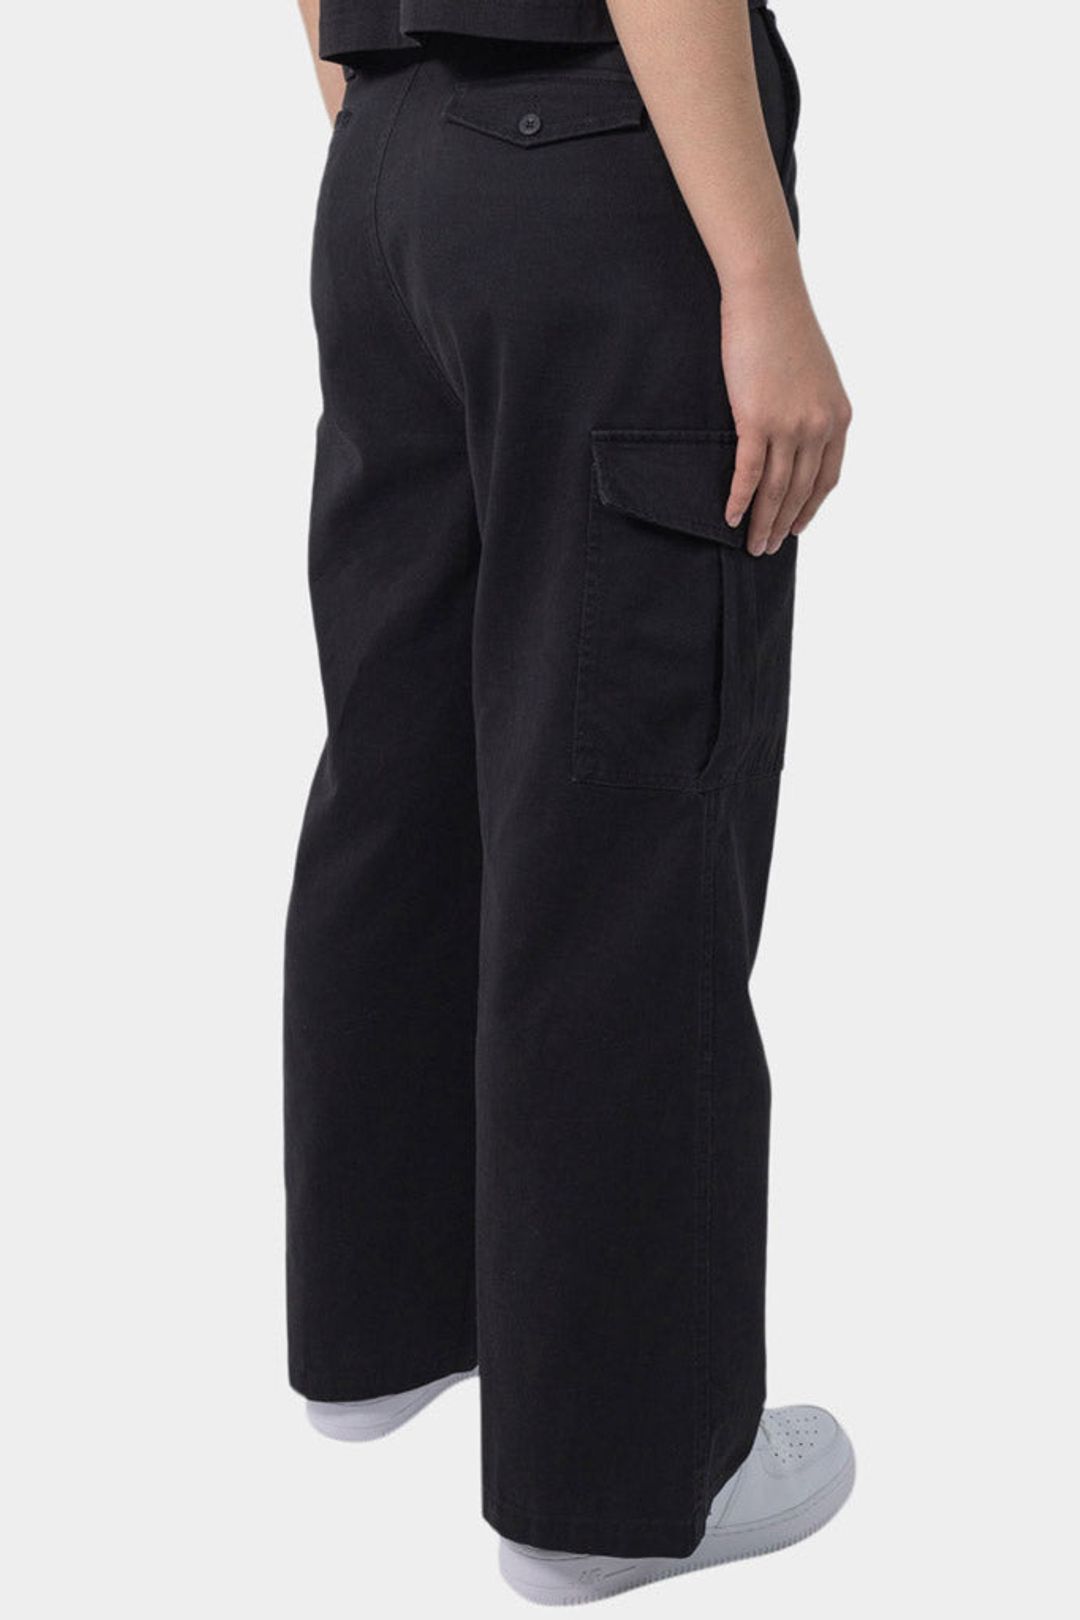 HOLLAND PLEATED CARGO PANT - SUNDAY BEST TRADING CO